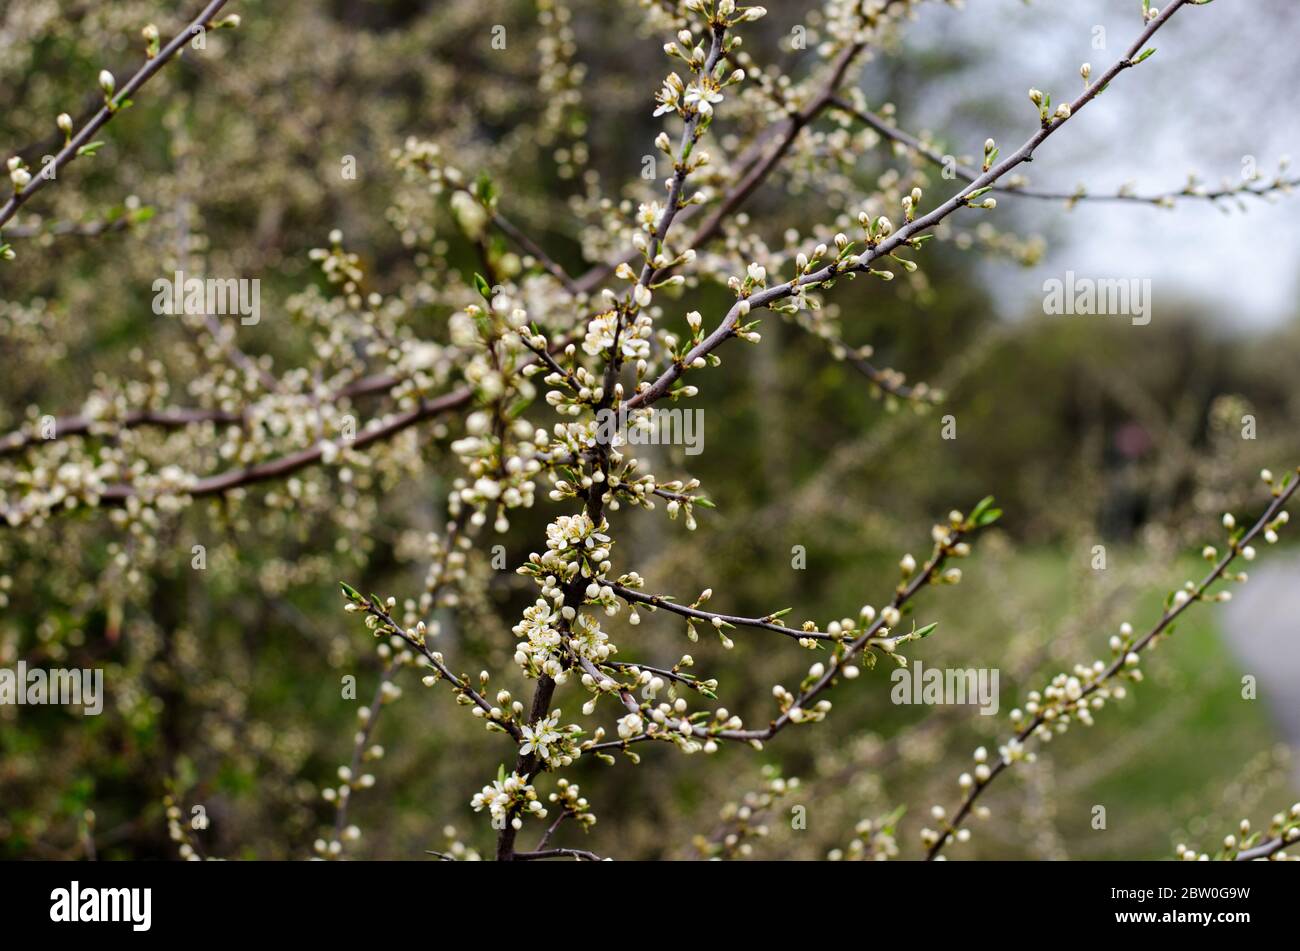 Sloe bush in early spring with buds and white flowers Stock Photo